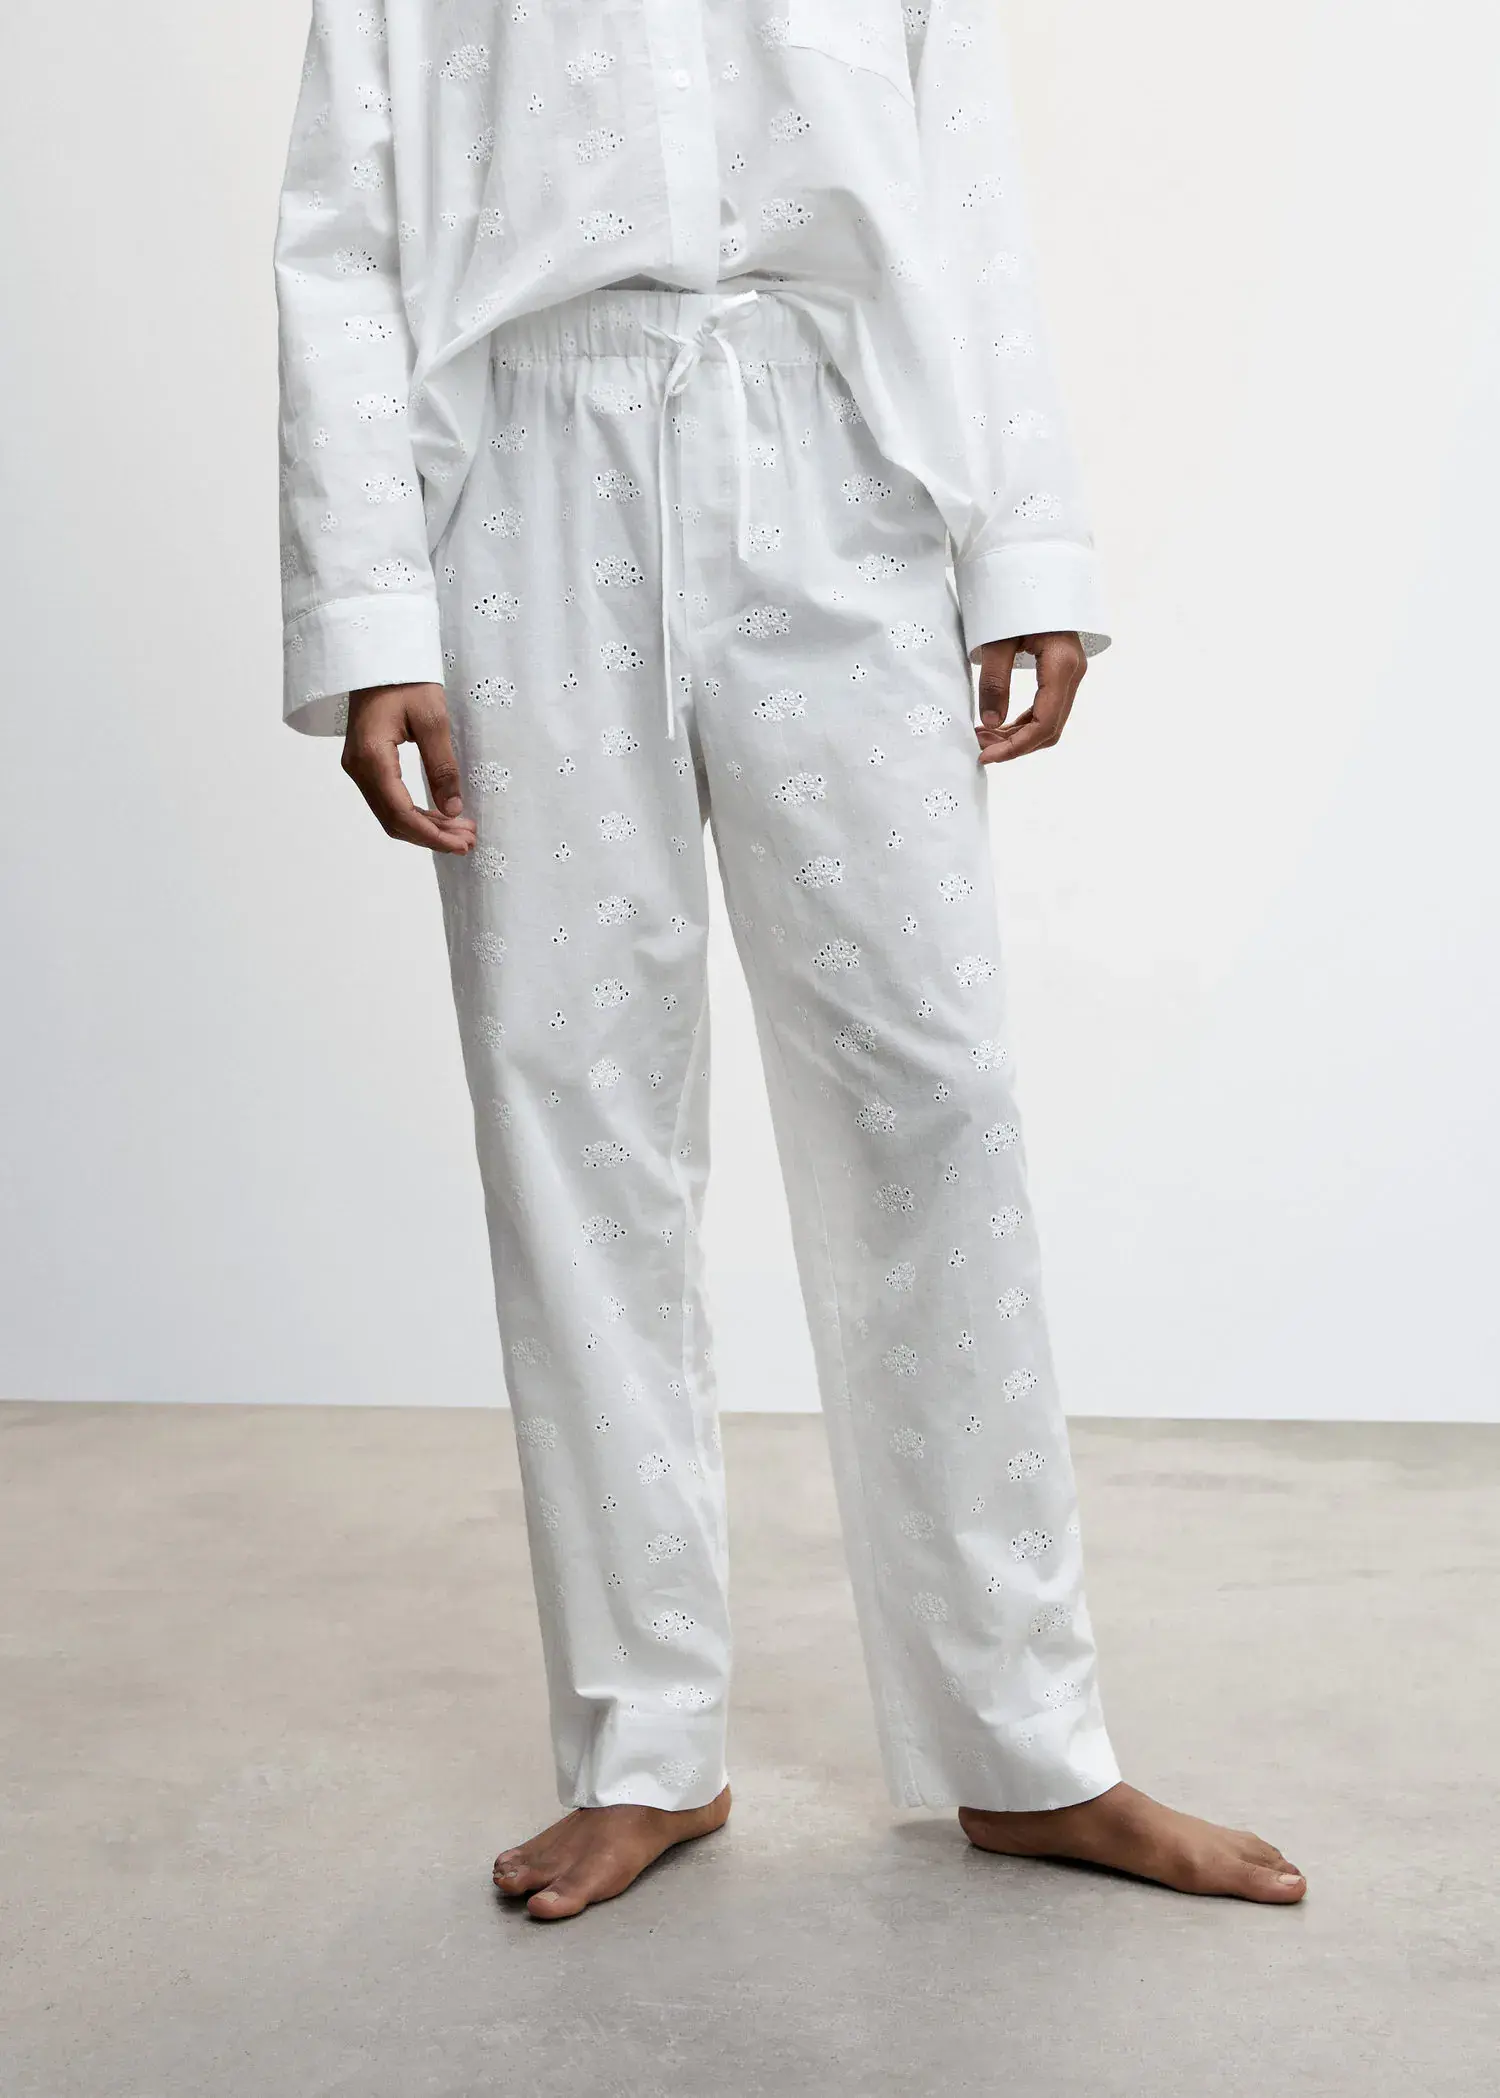 Mango Pyjama trousers with openwork details. a person standing in a room wearing white pajamas. 